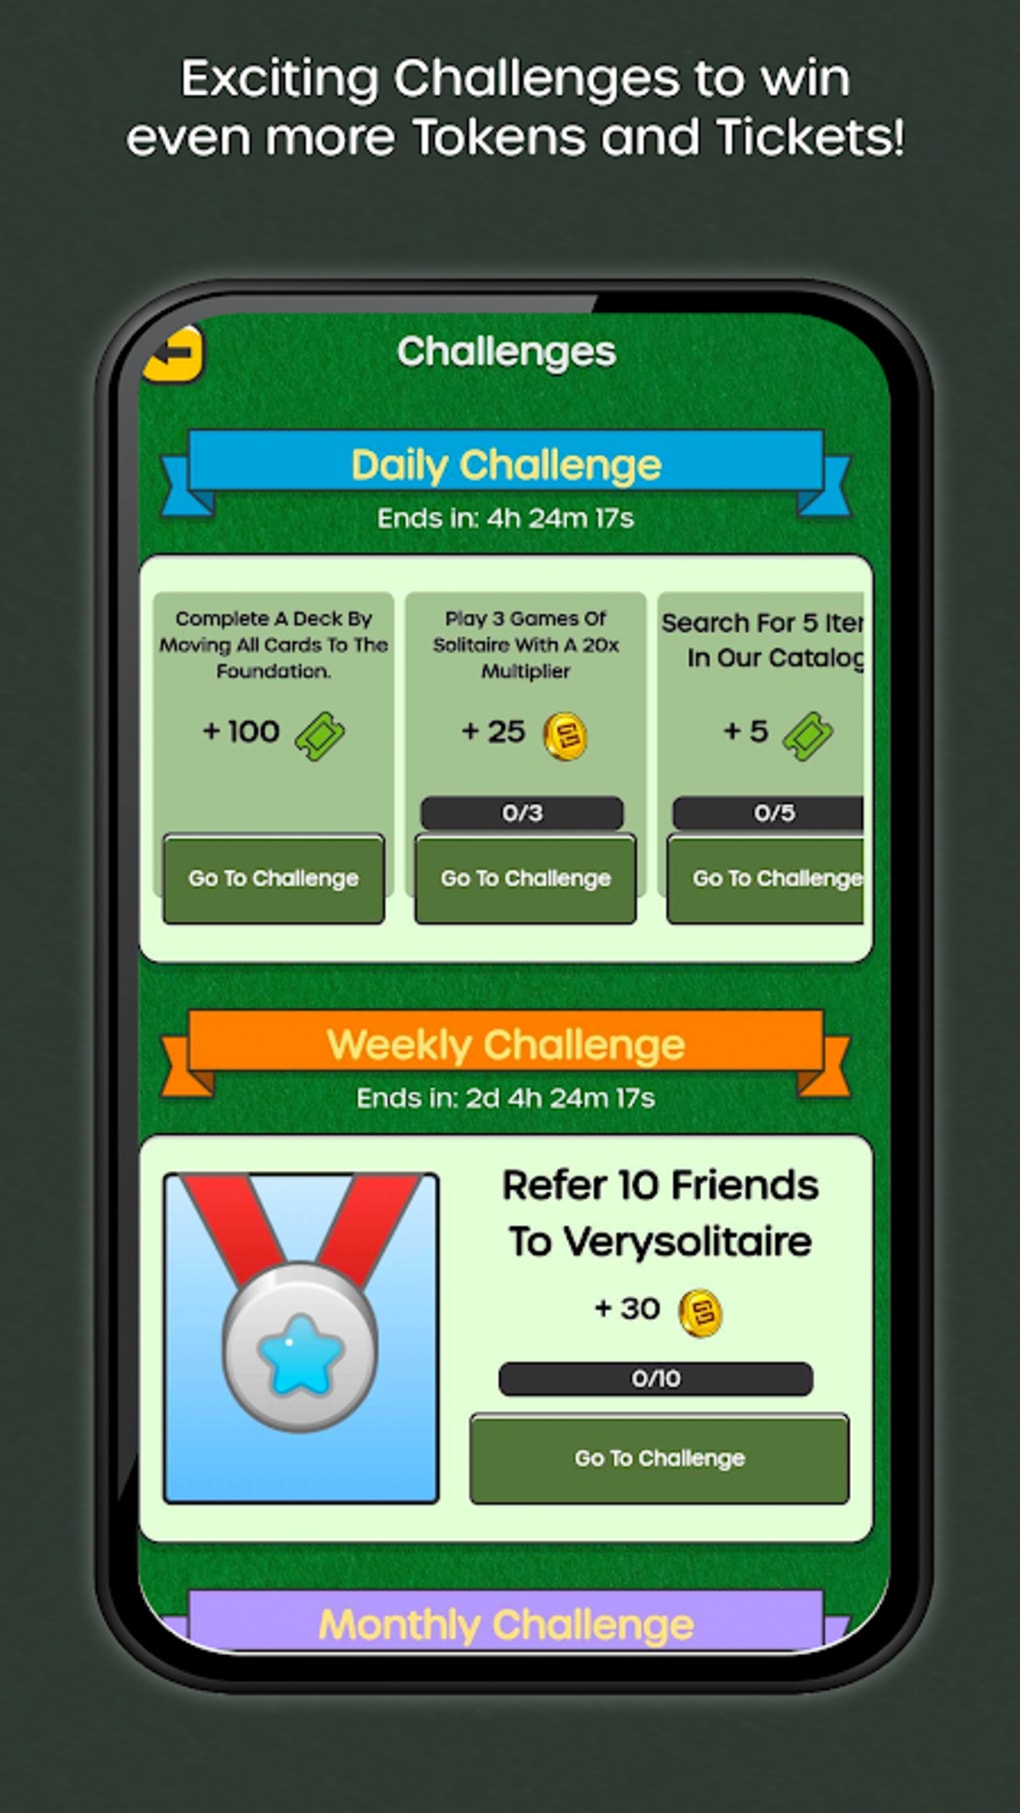 Play Solitaire Weekly Rewards! 